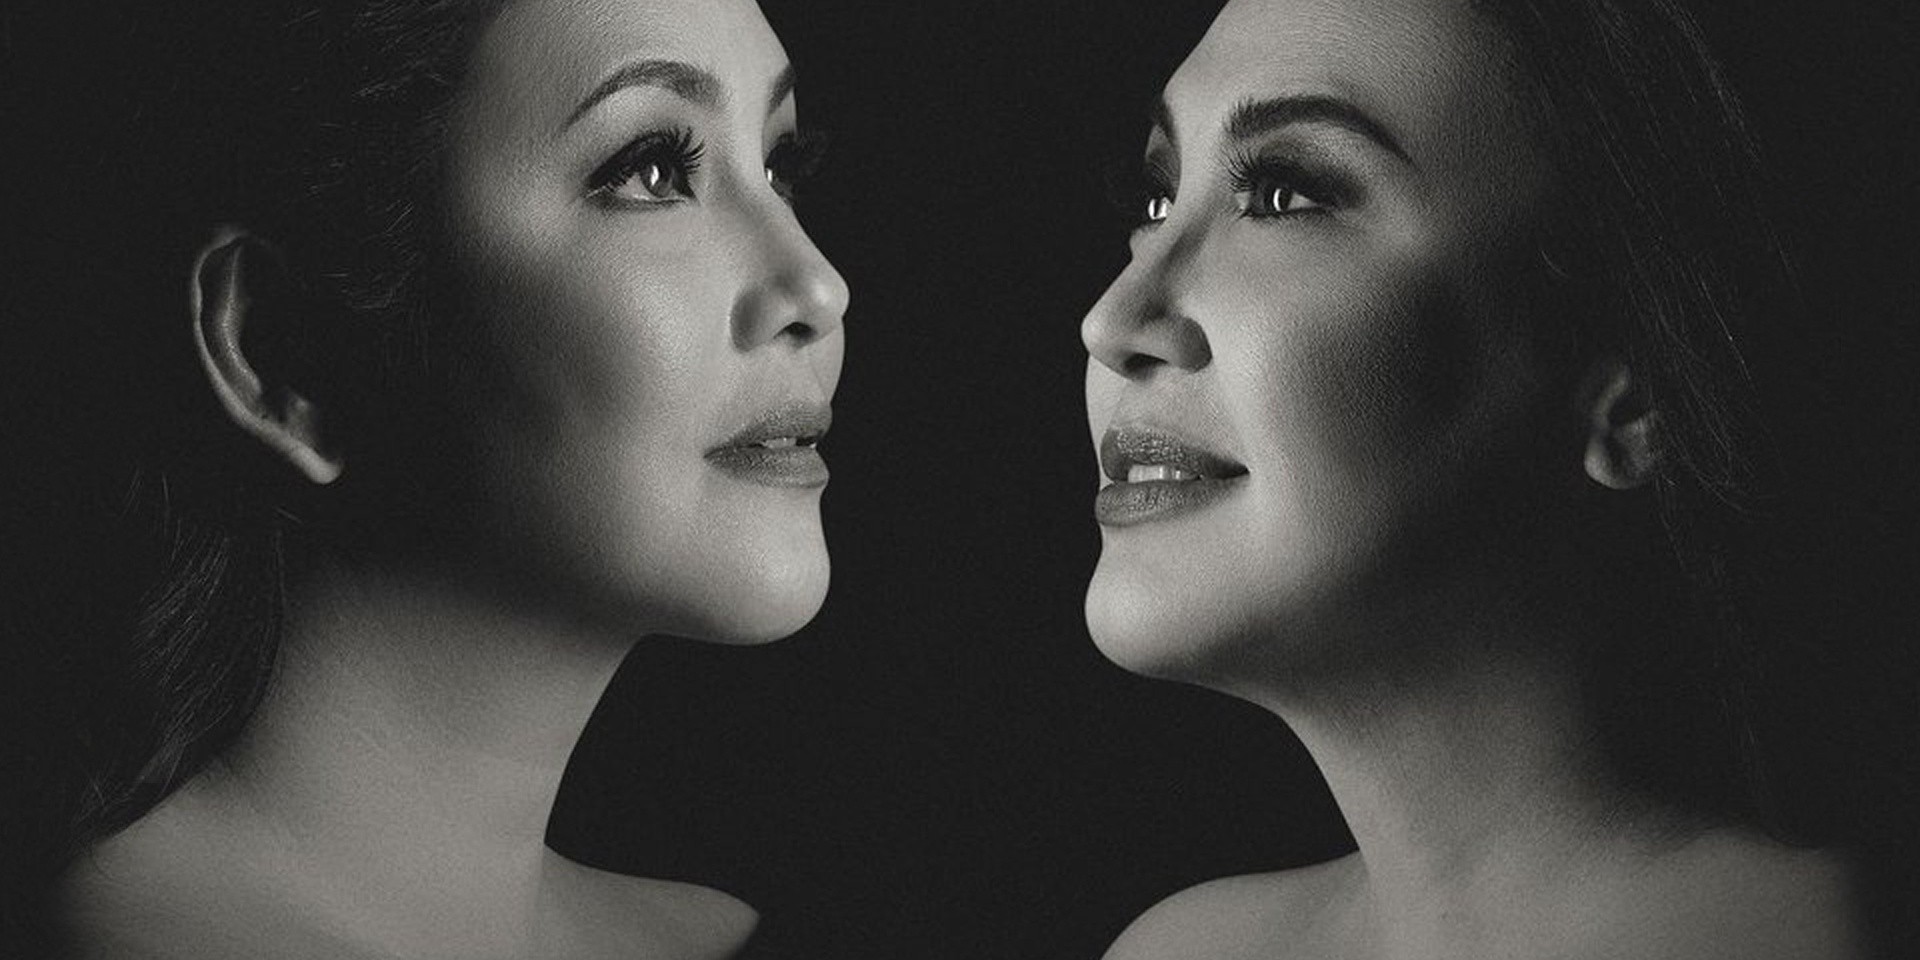 Sharon Cuneta and Regine Velasquez to share the stage at 2-night Iconic concert